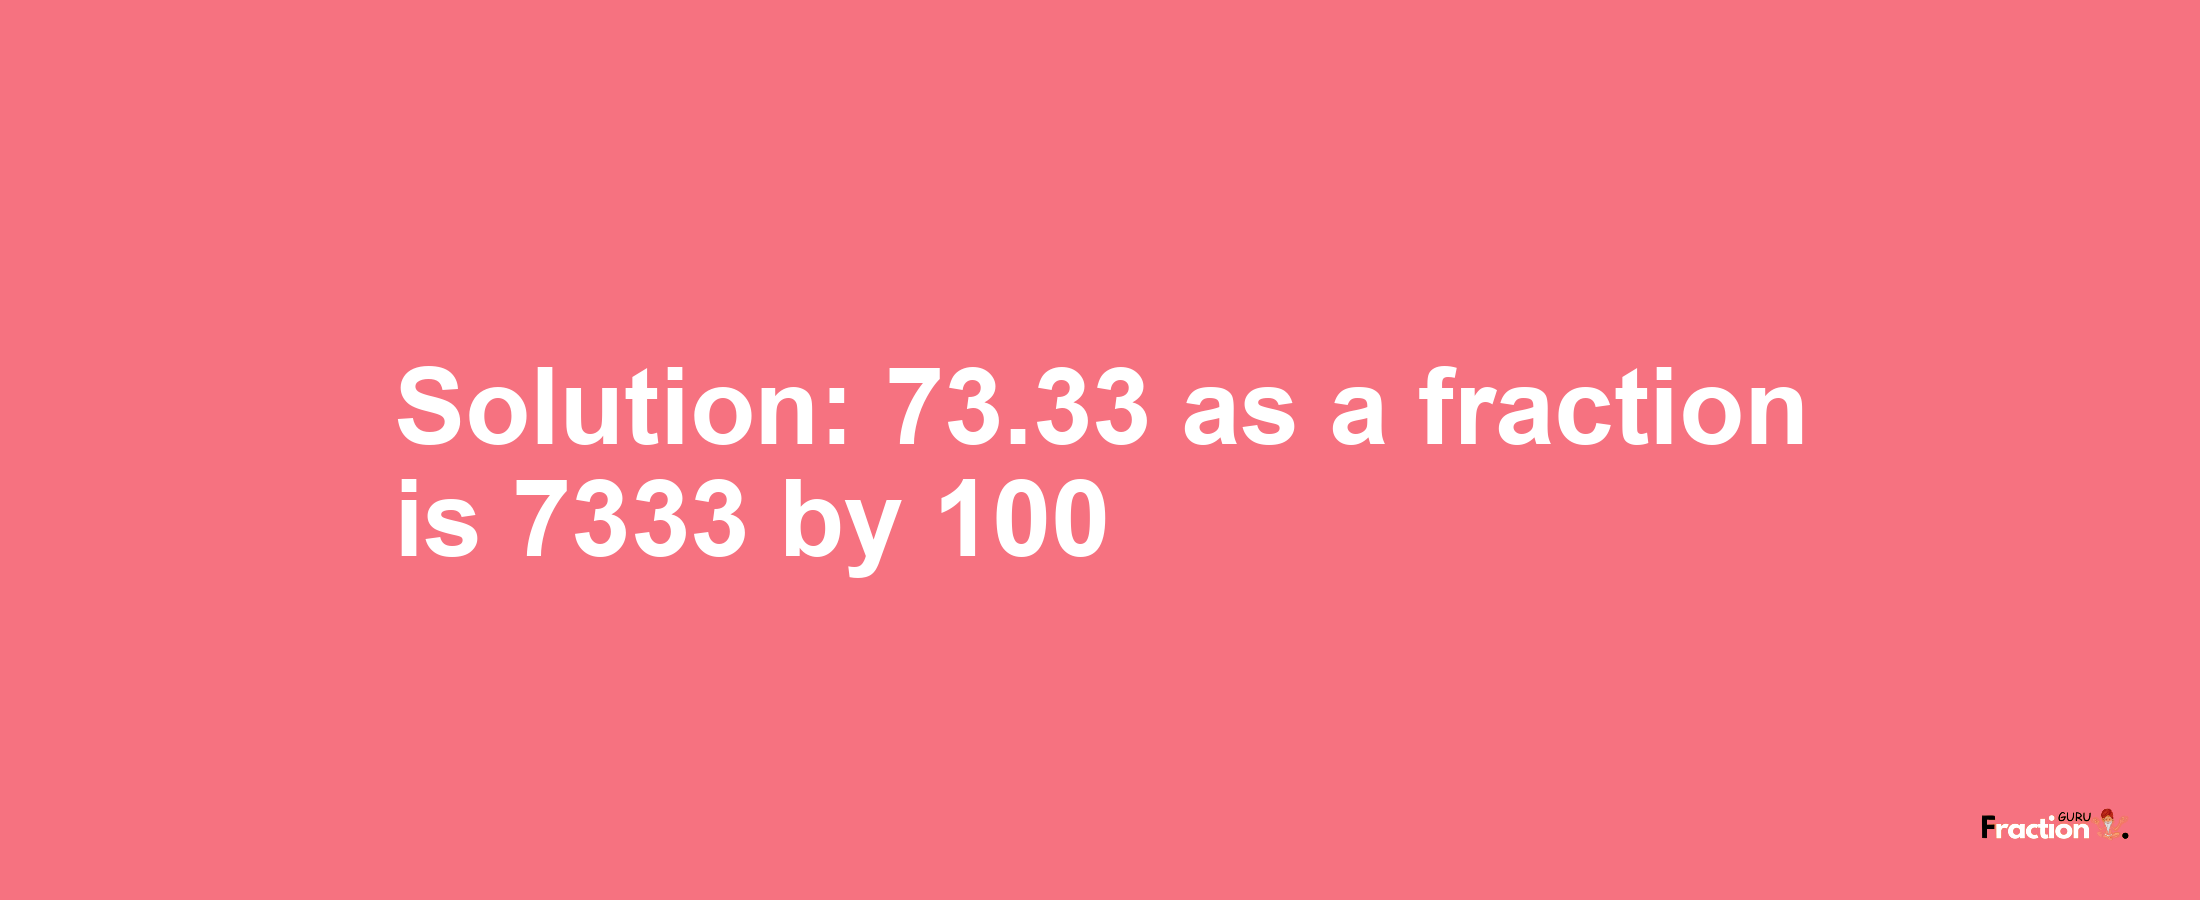 Solution:73.33 as a fraction is 7333/100